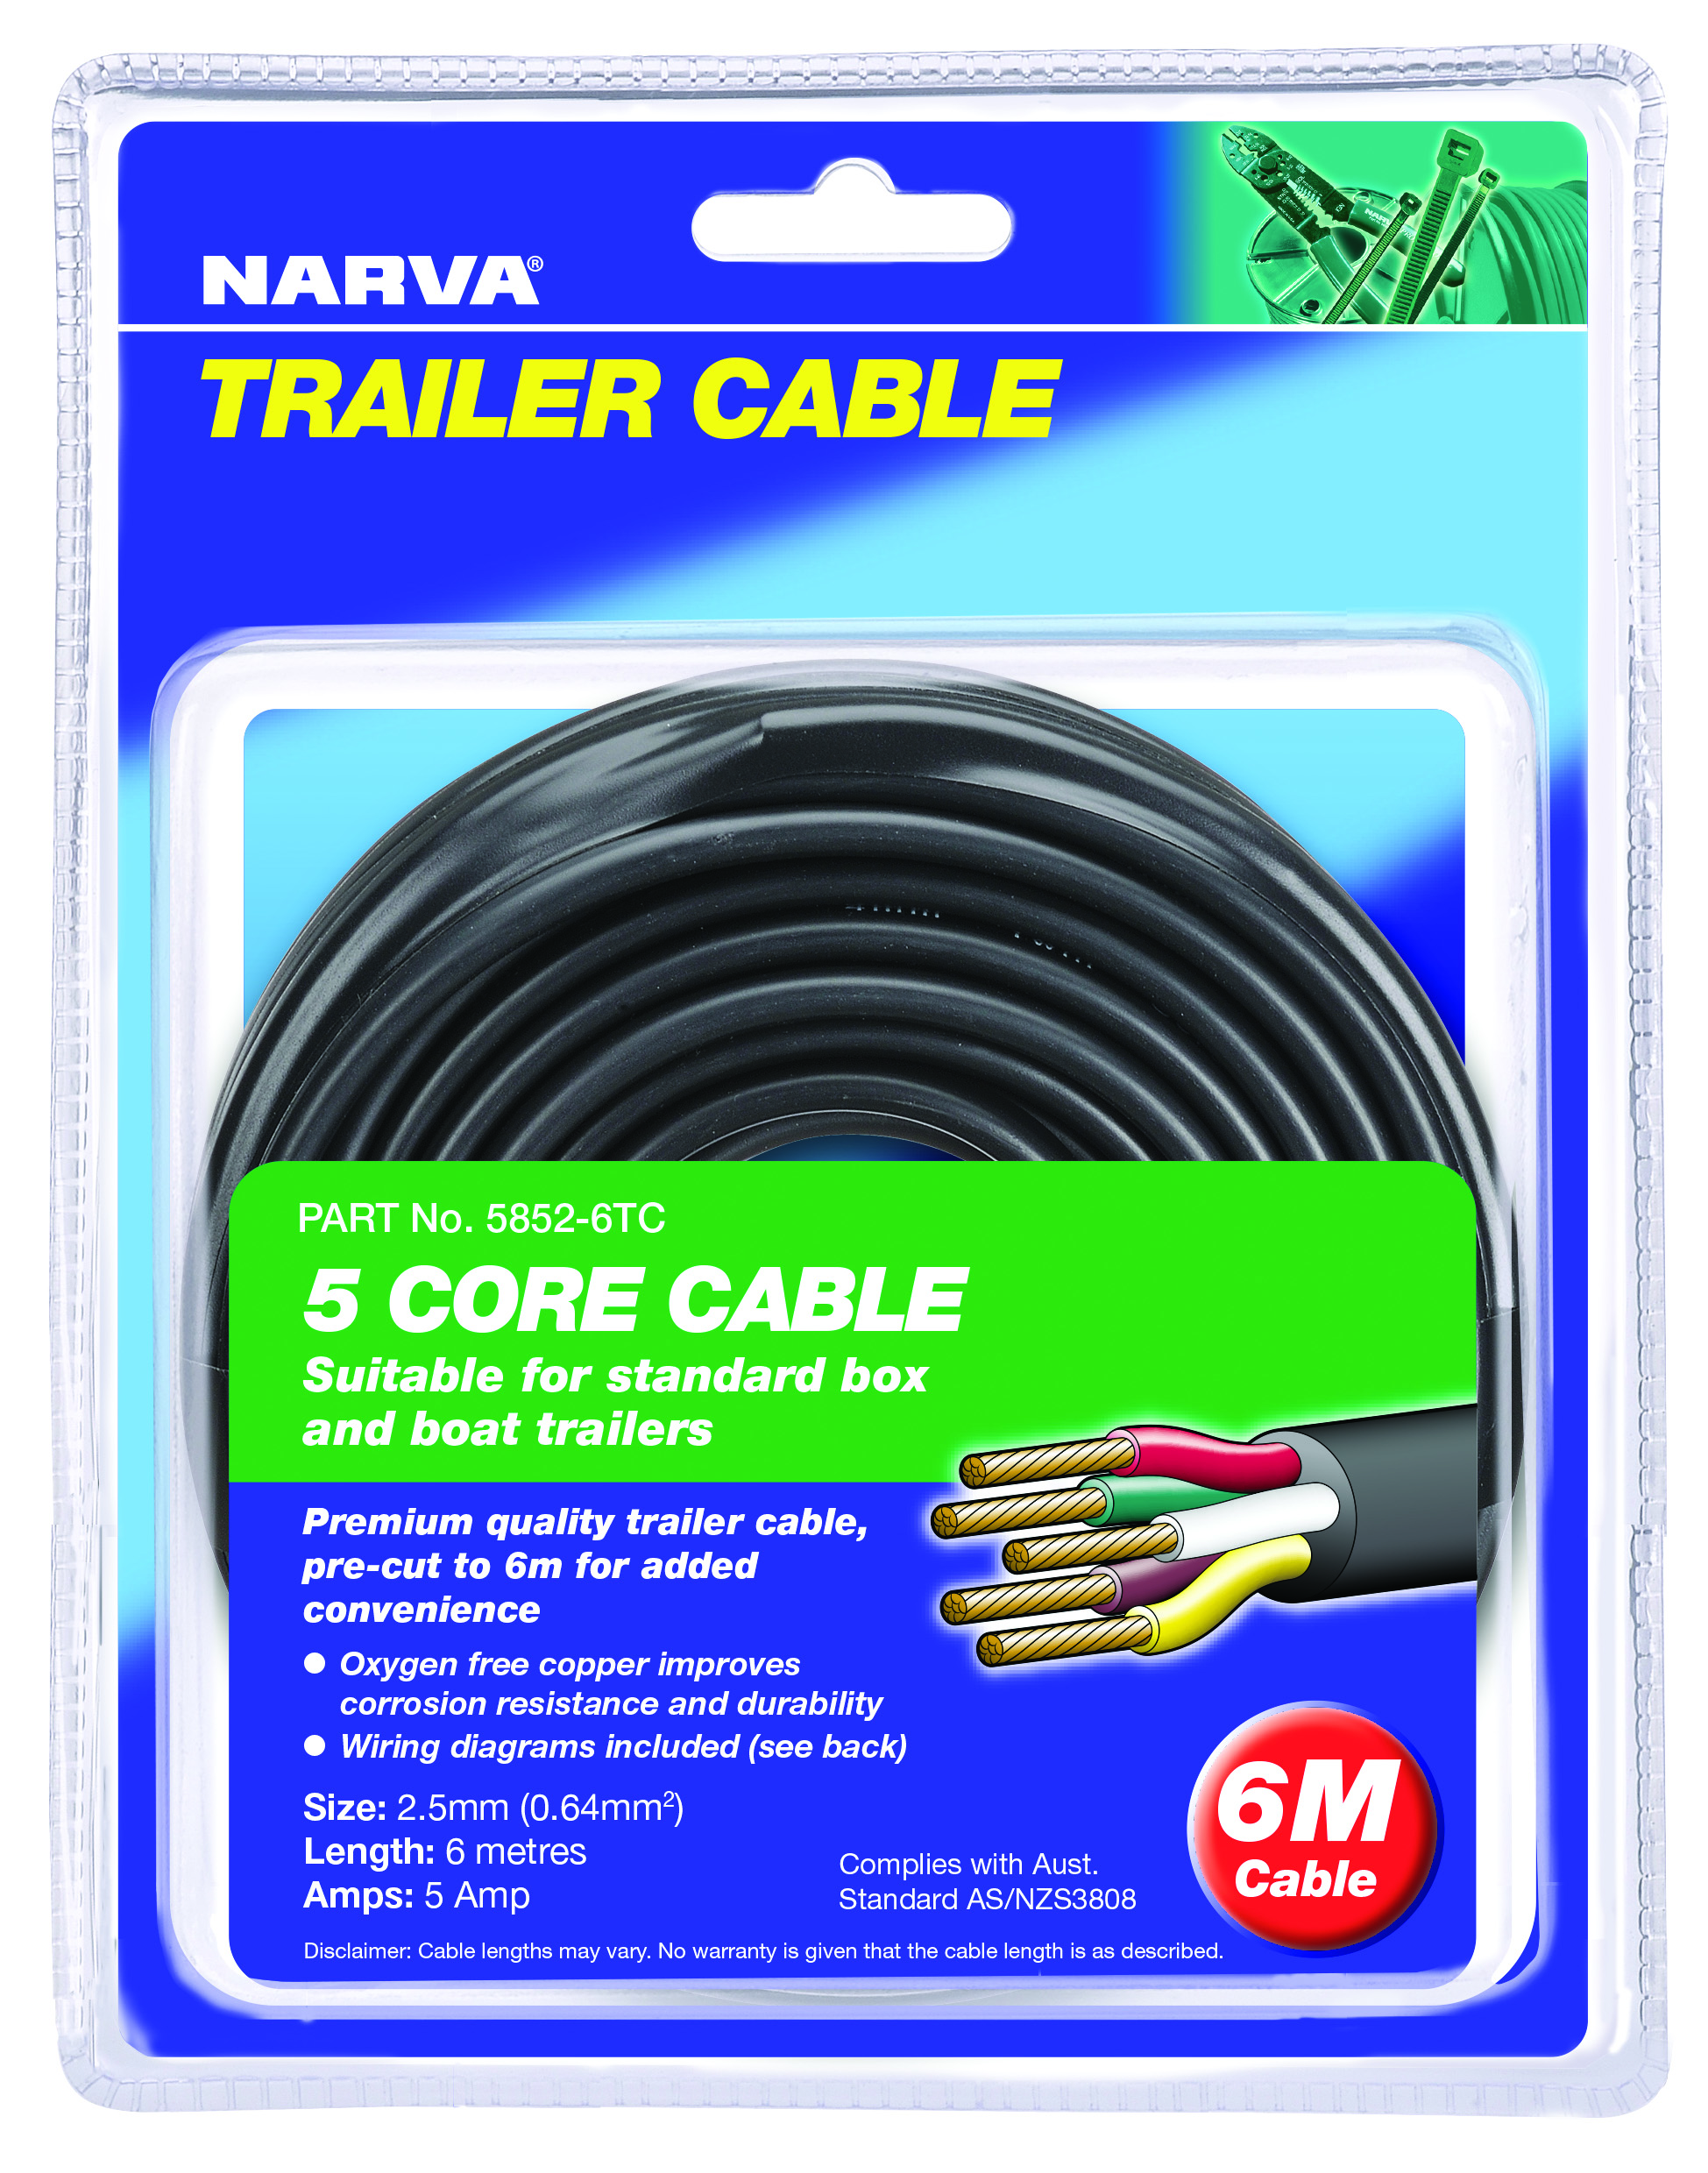 Narva 5A 2.5MM 5 CORE TRAILER CABLE (6M) Red; Green; Yellow; White; Brown  5852-6TC - Auto One